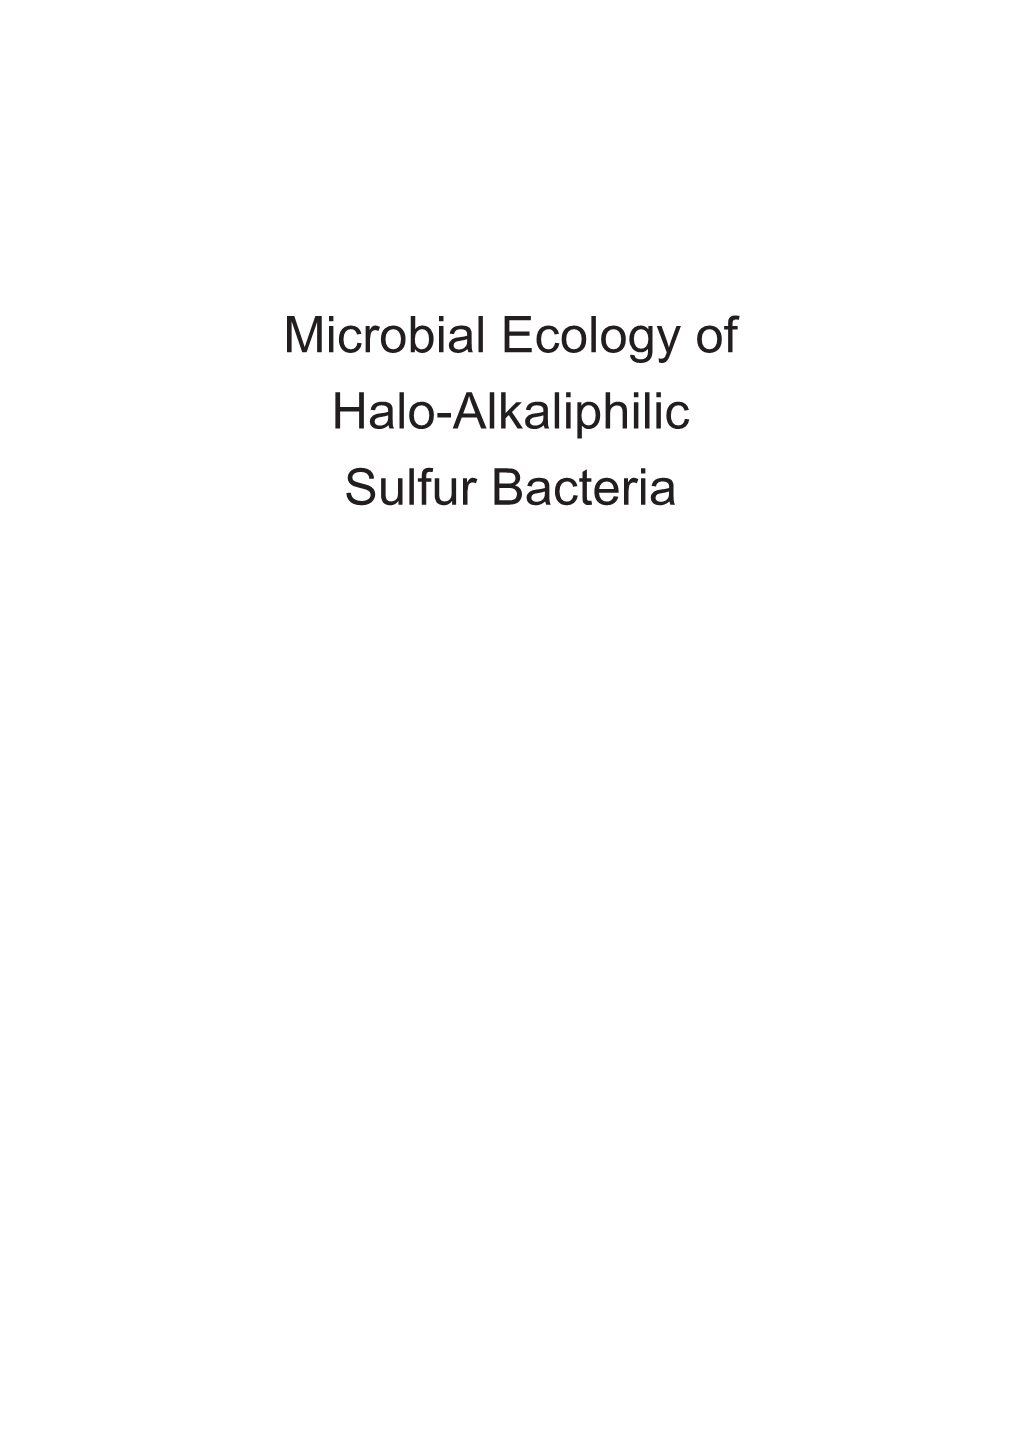 Microbial Ecology of Halo-Alkaliphilic Sulfur Bacteria